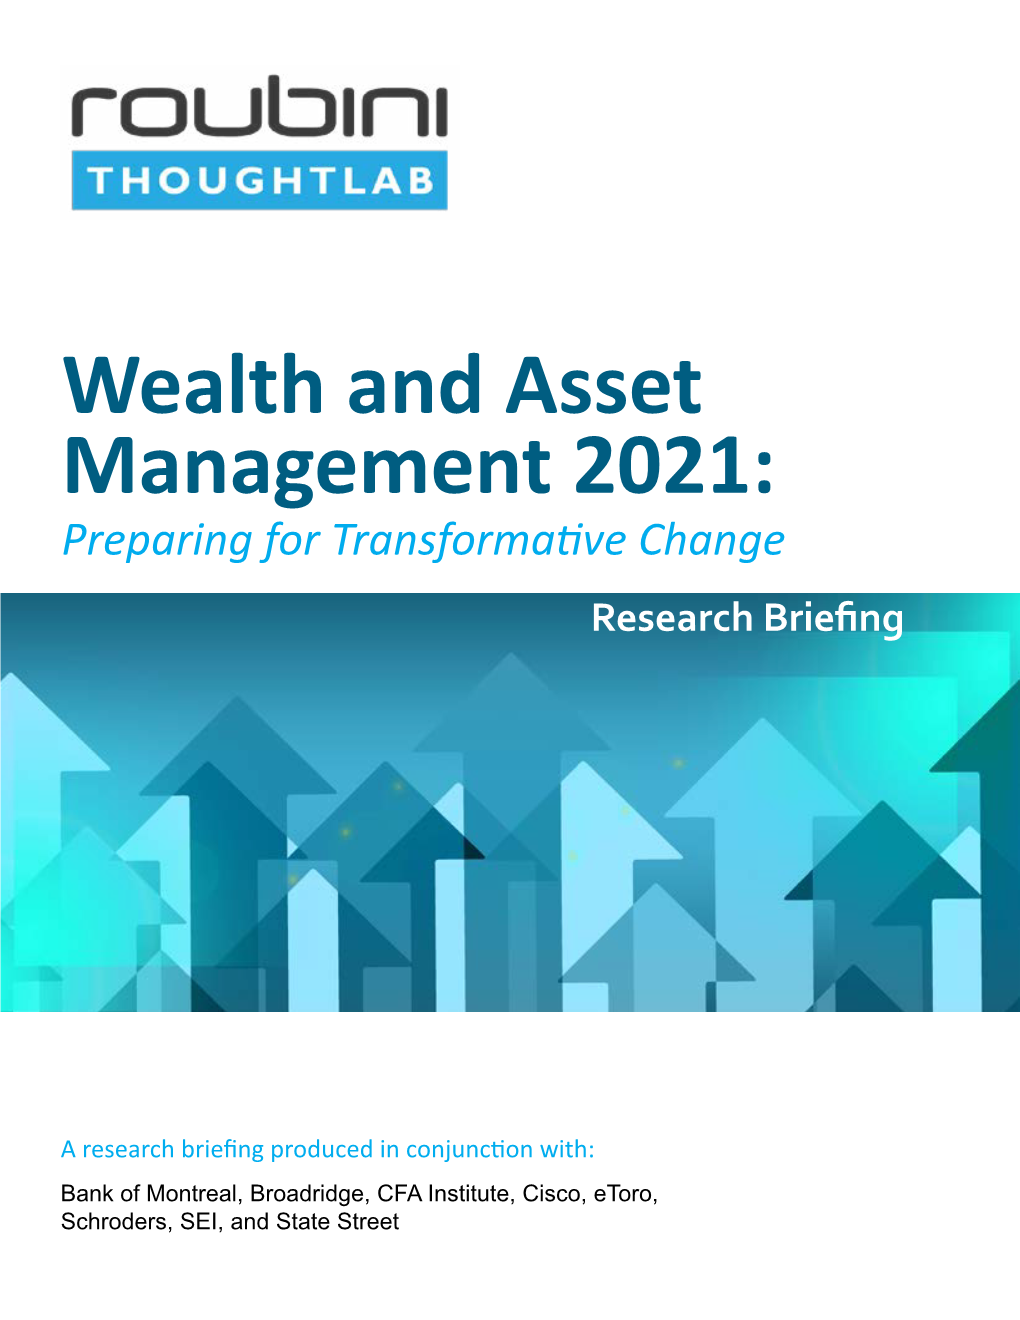 Wealth and Asset Management 2021: Preparing for Transformative Change Research Briefing